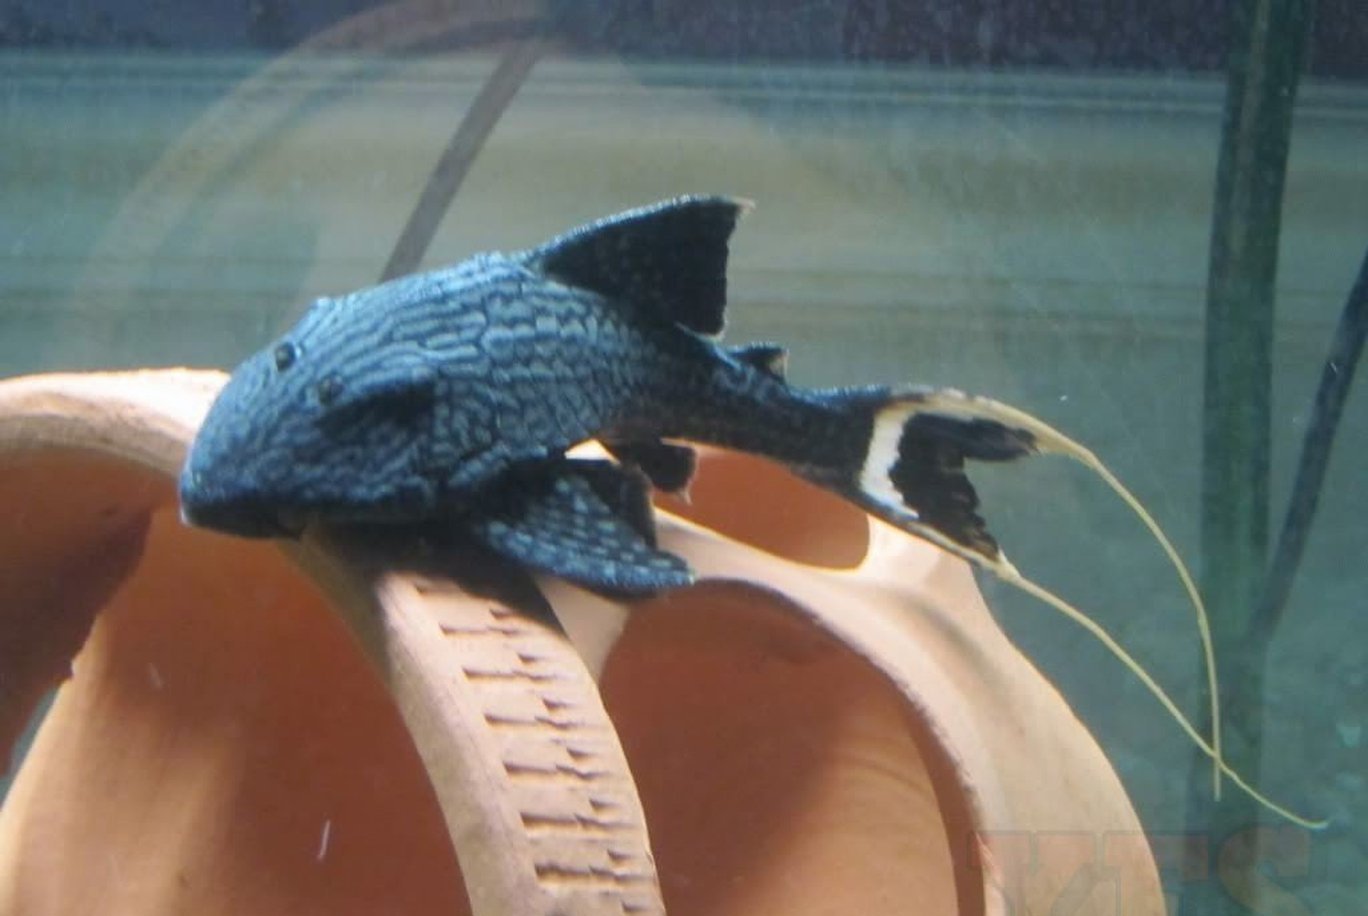 X1 Papa Lyretail Pleco Sml/Med 1"-2" Tank Cleaners!-Freshwater Fish Package-www.YourFishStore.com